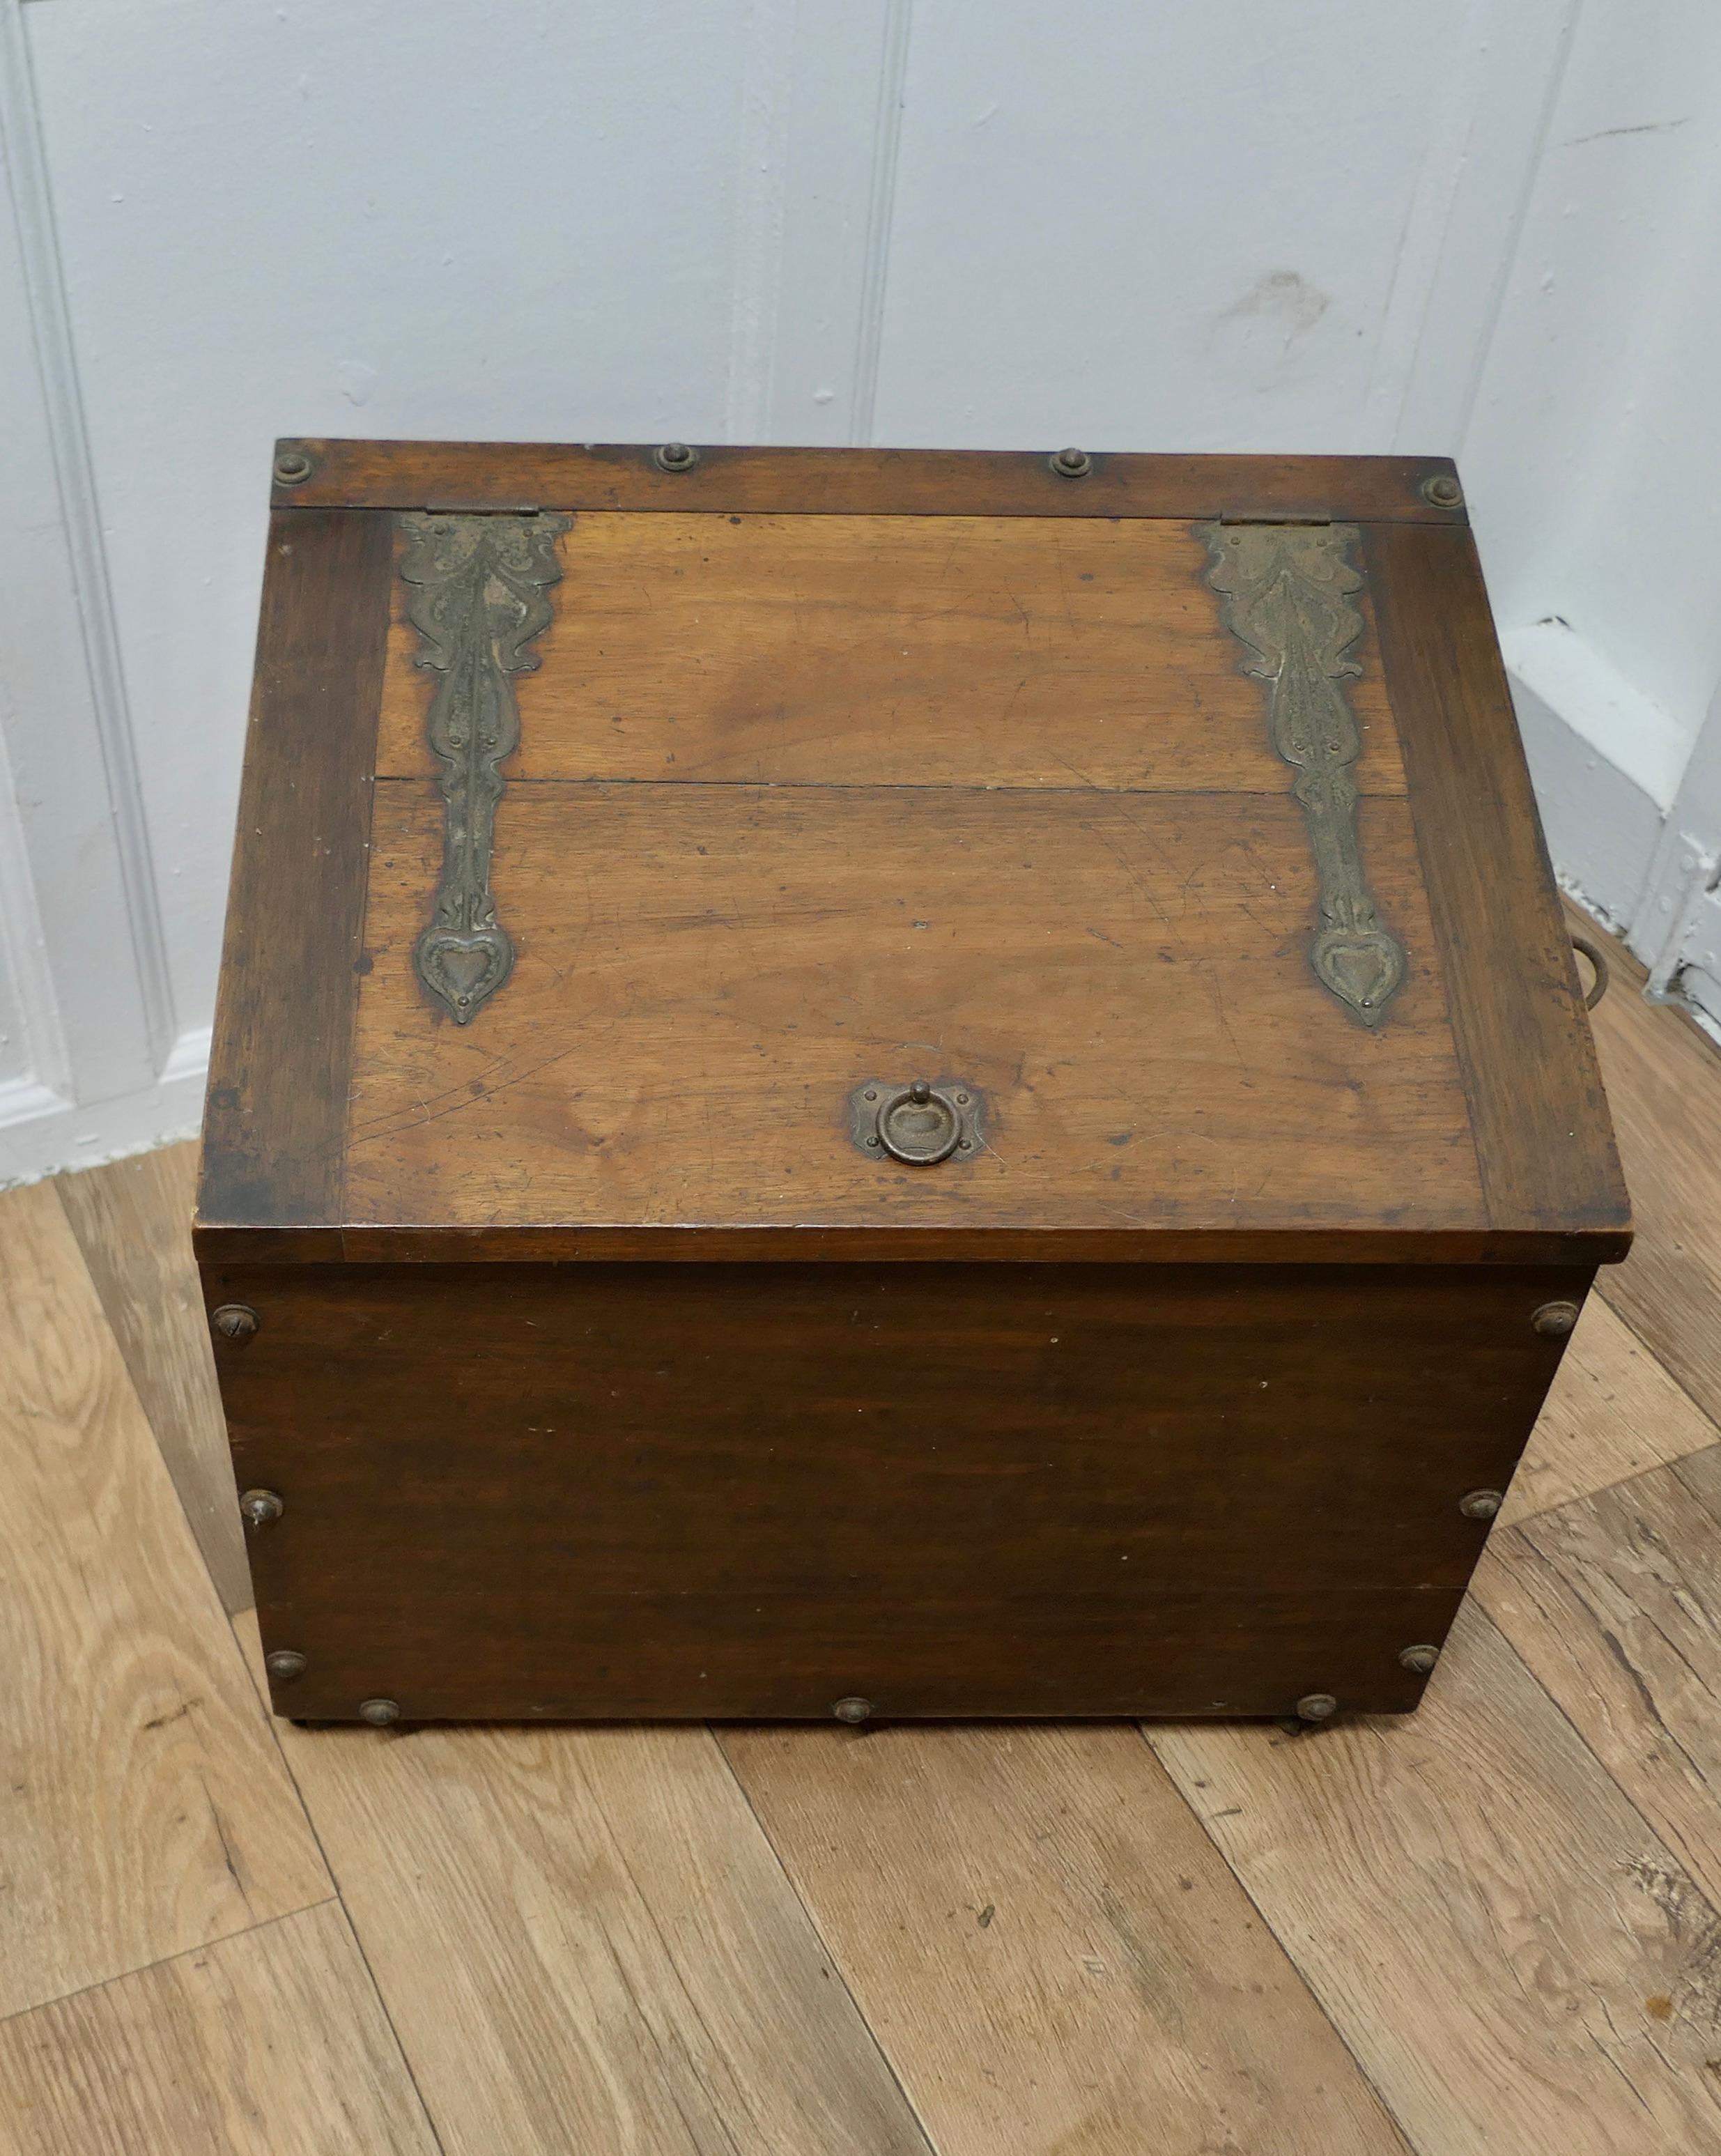 Walnut Art Nouveau Log or Storage Box  This big log box is made in solid walnut  For Sale